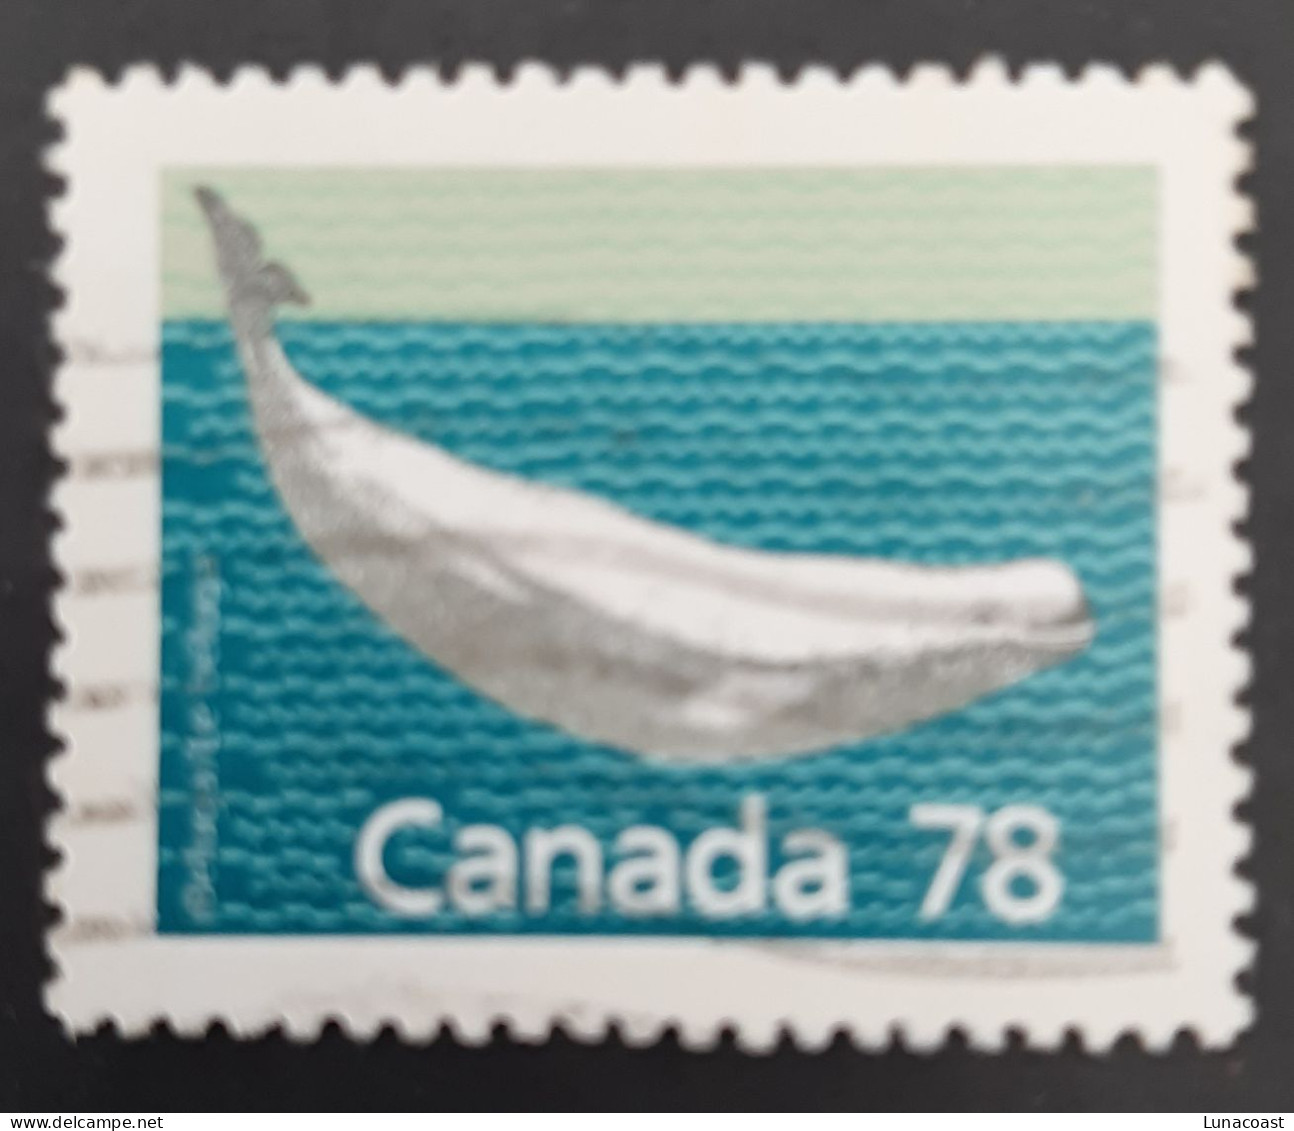 Canada 1990  USED  Sc1179b,   PERF. 13.1 X 13.1,  78c Beluga Whale - Used Stamps